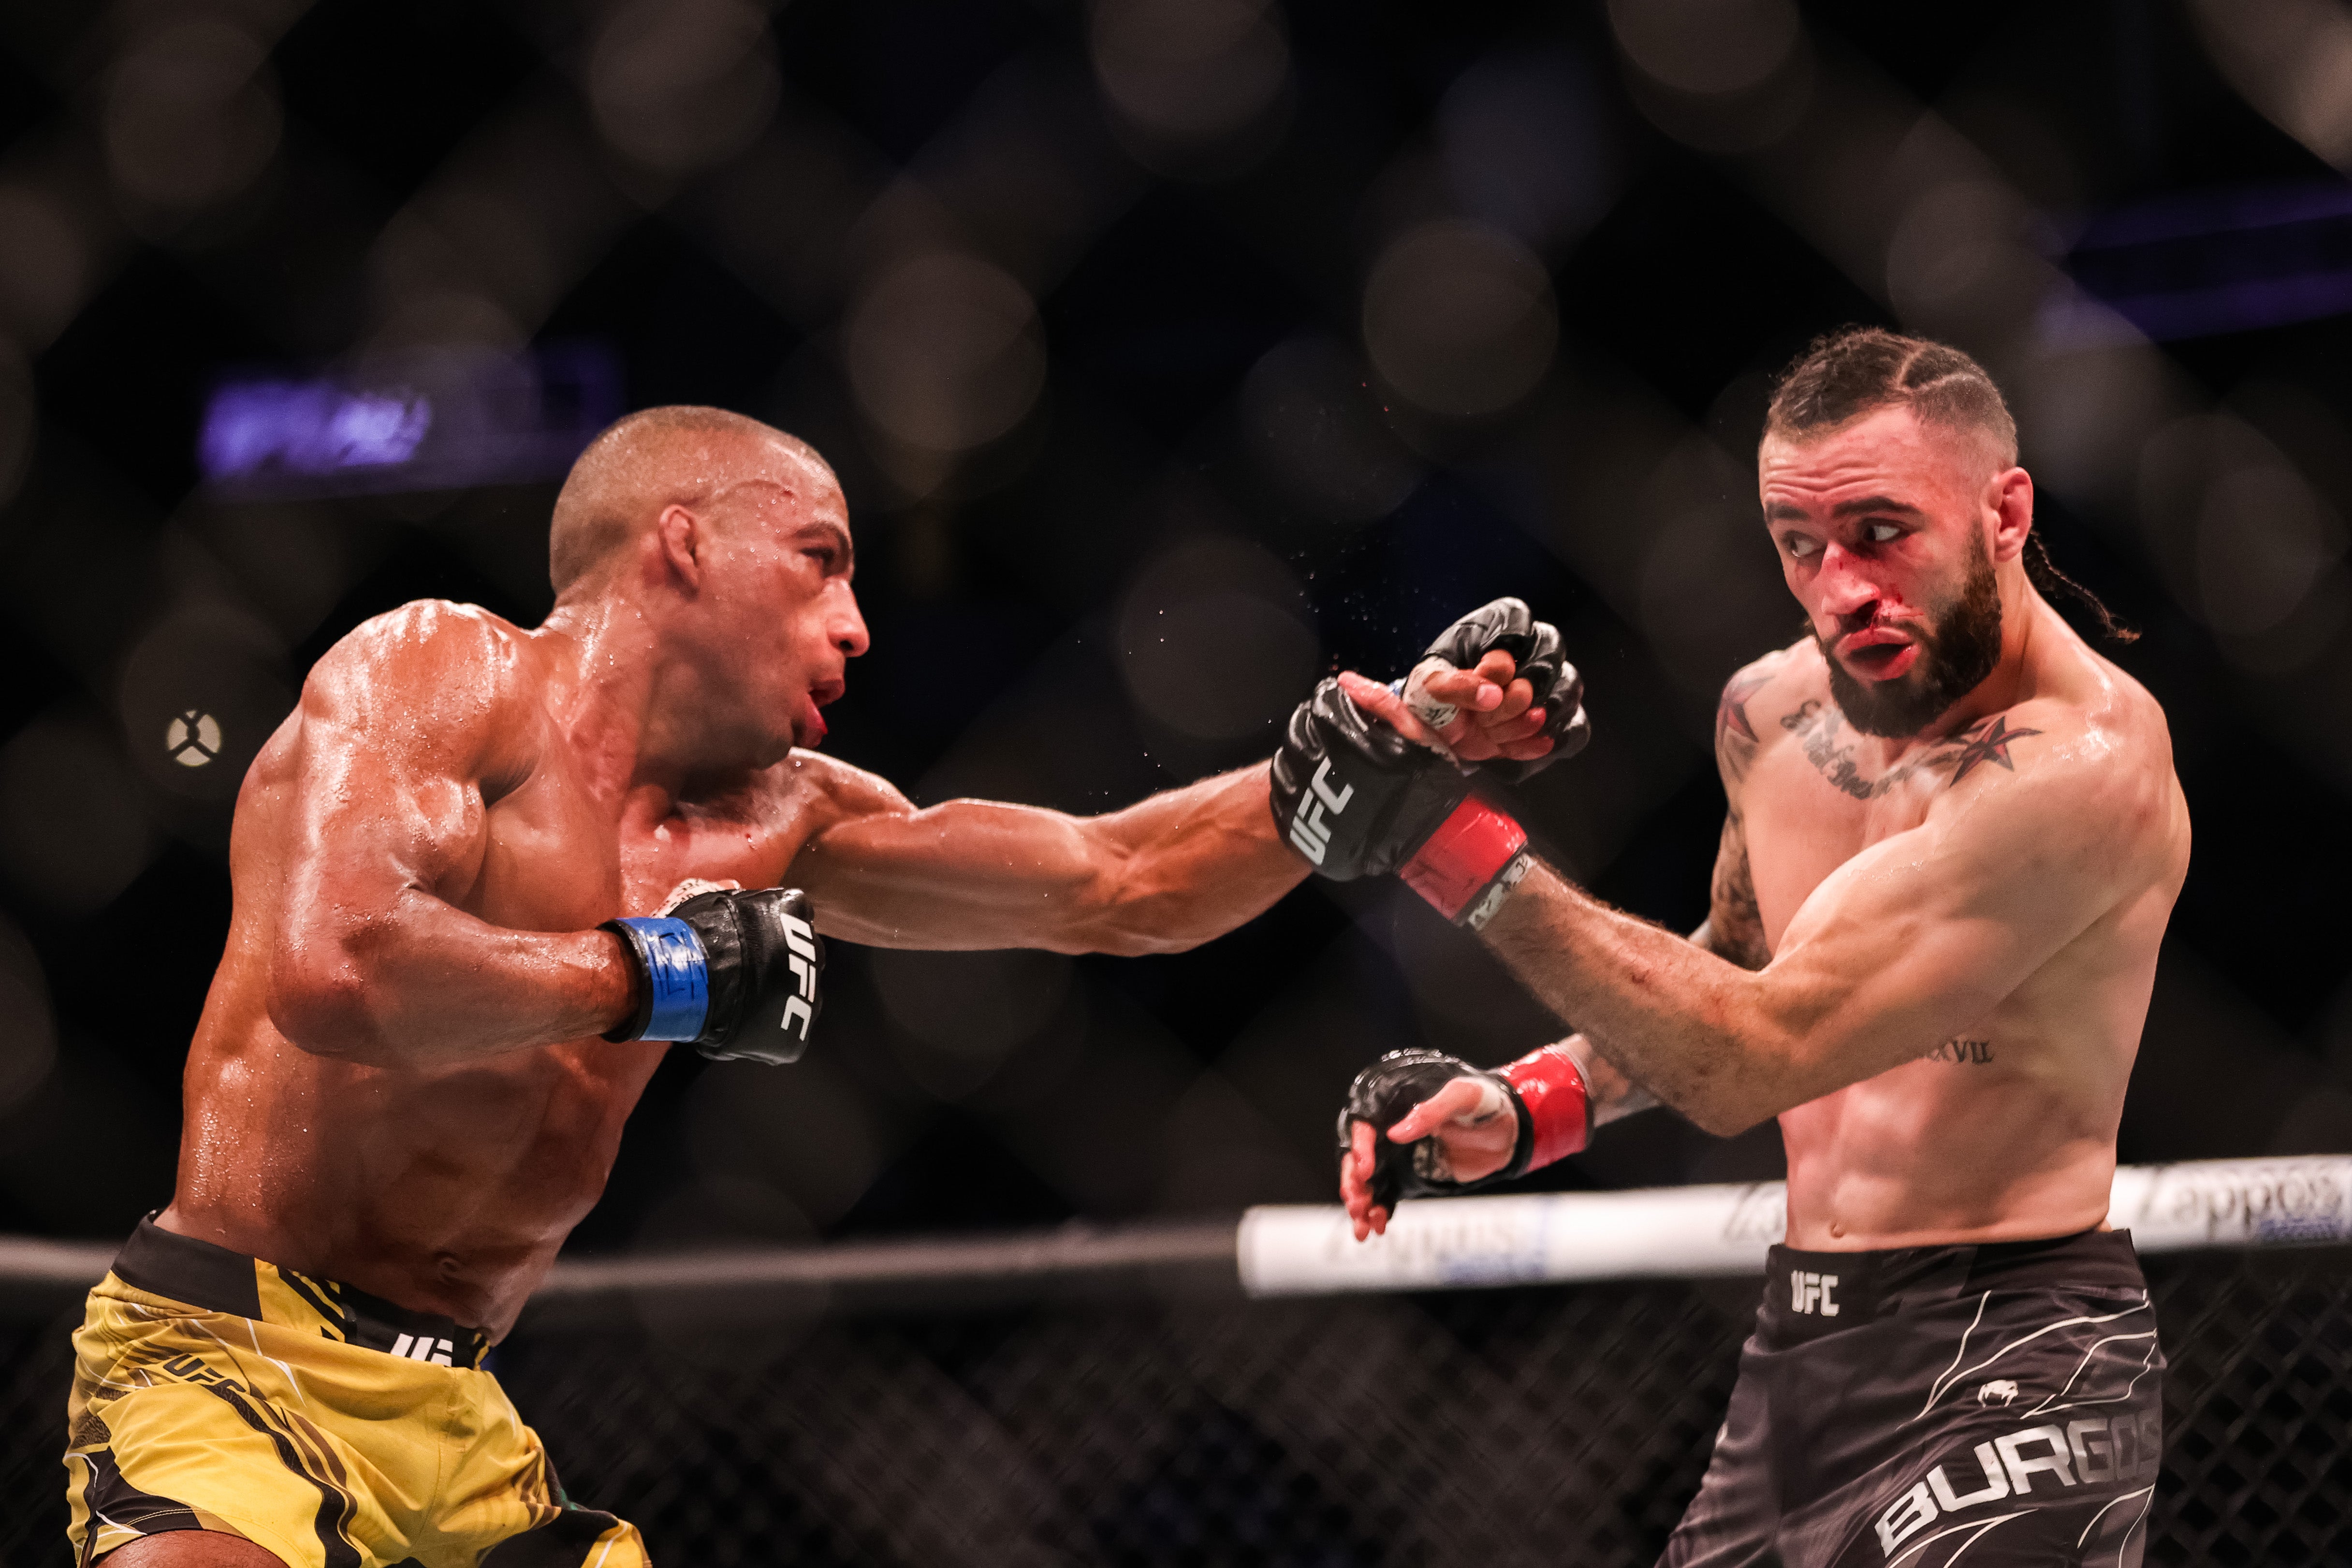 Barboza (left) stopped Burgos in the third round at UFC 262